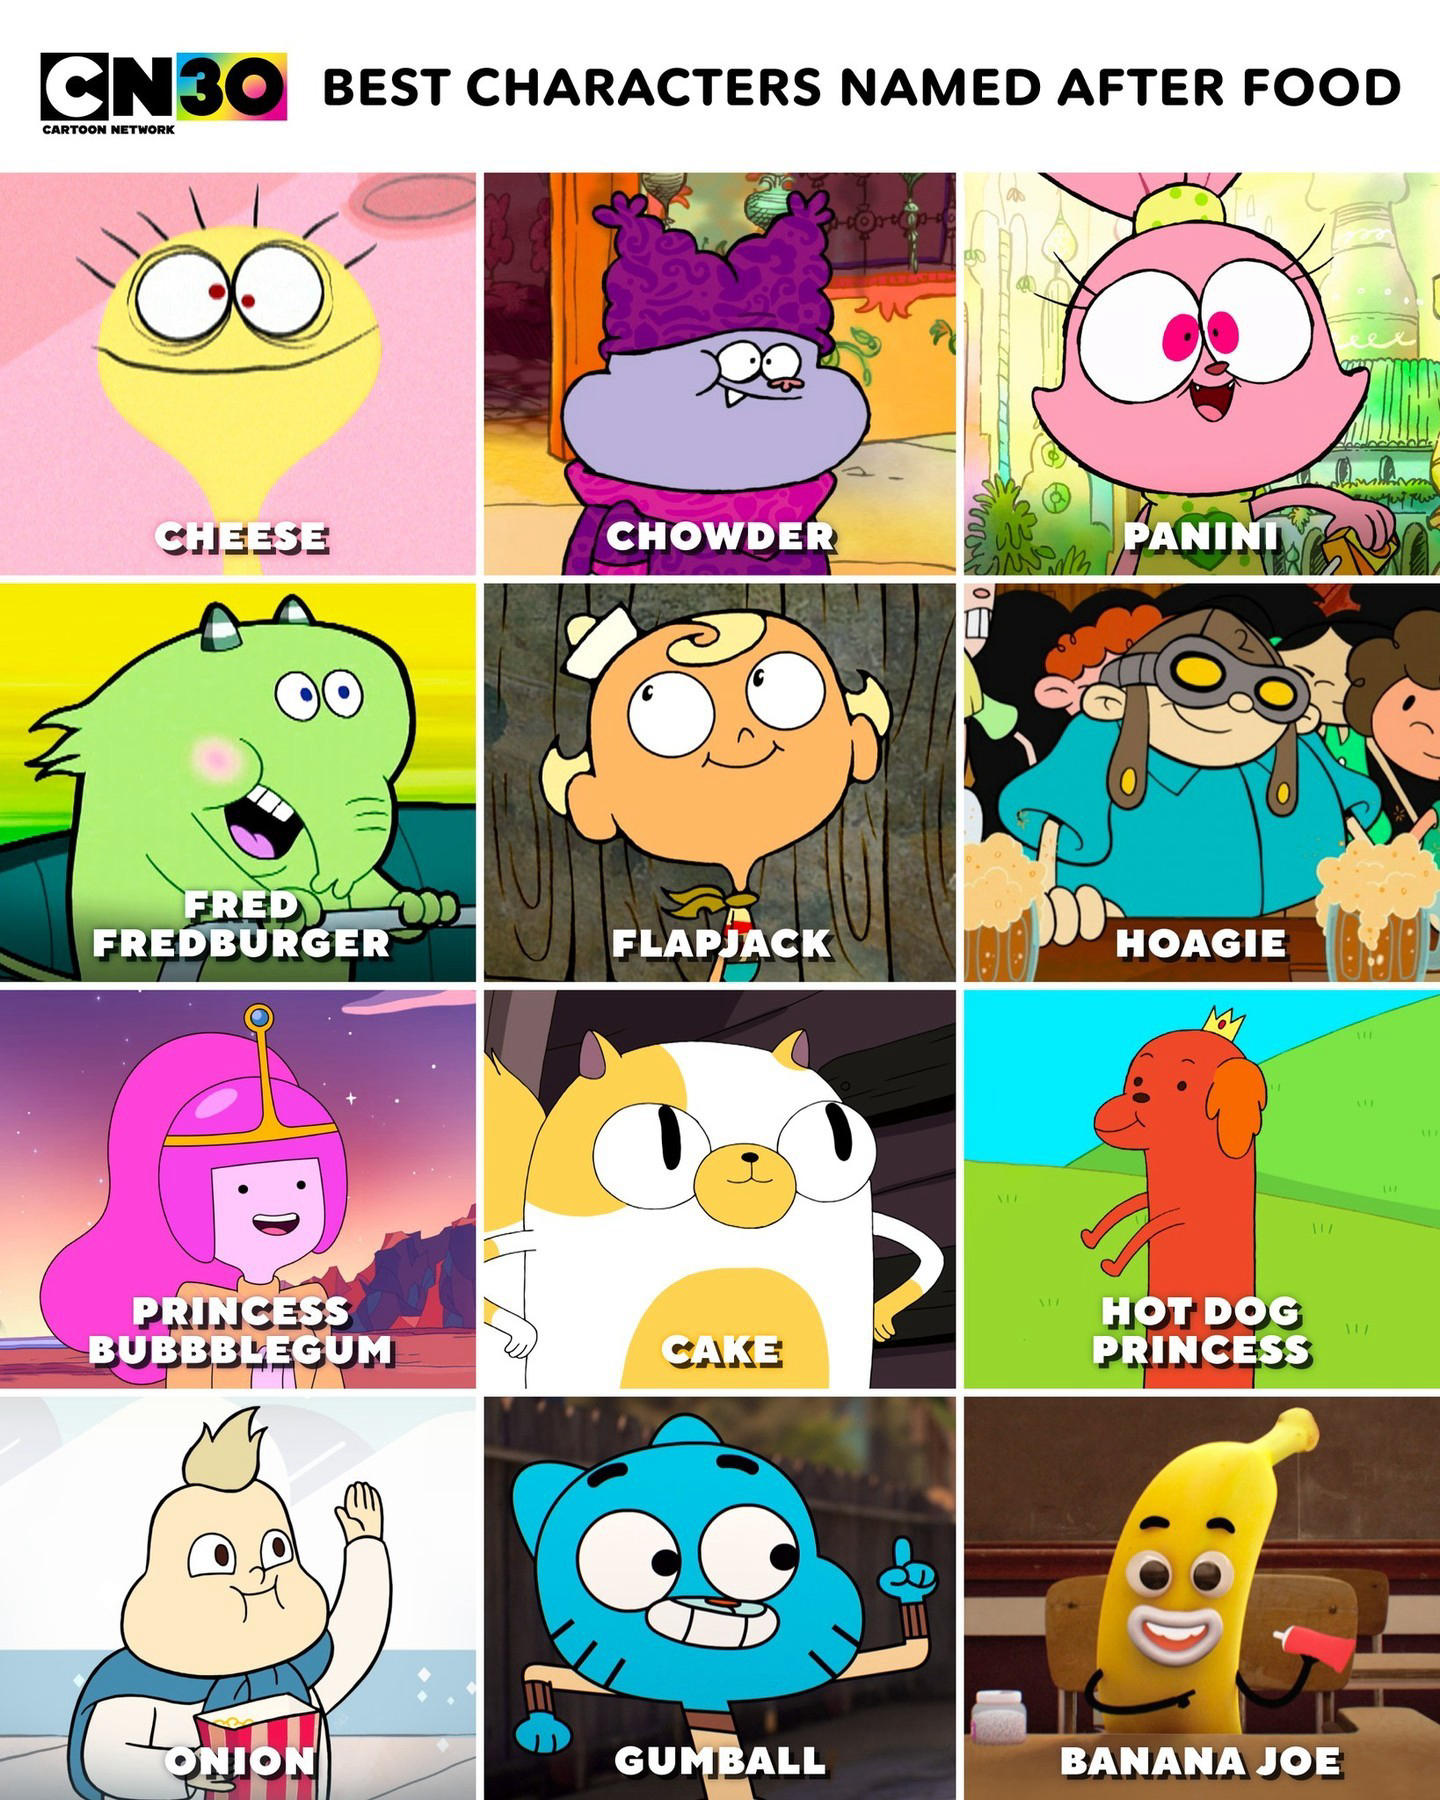 Cartoon Network - Pick your favorite food-named character